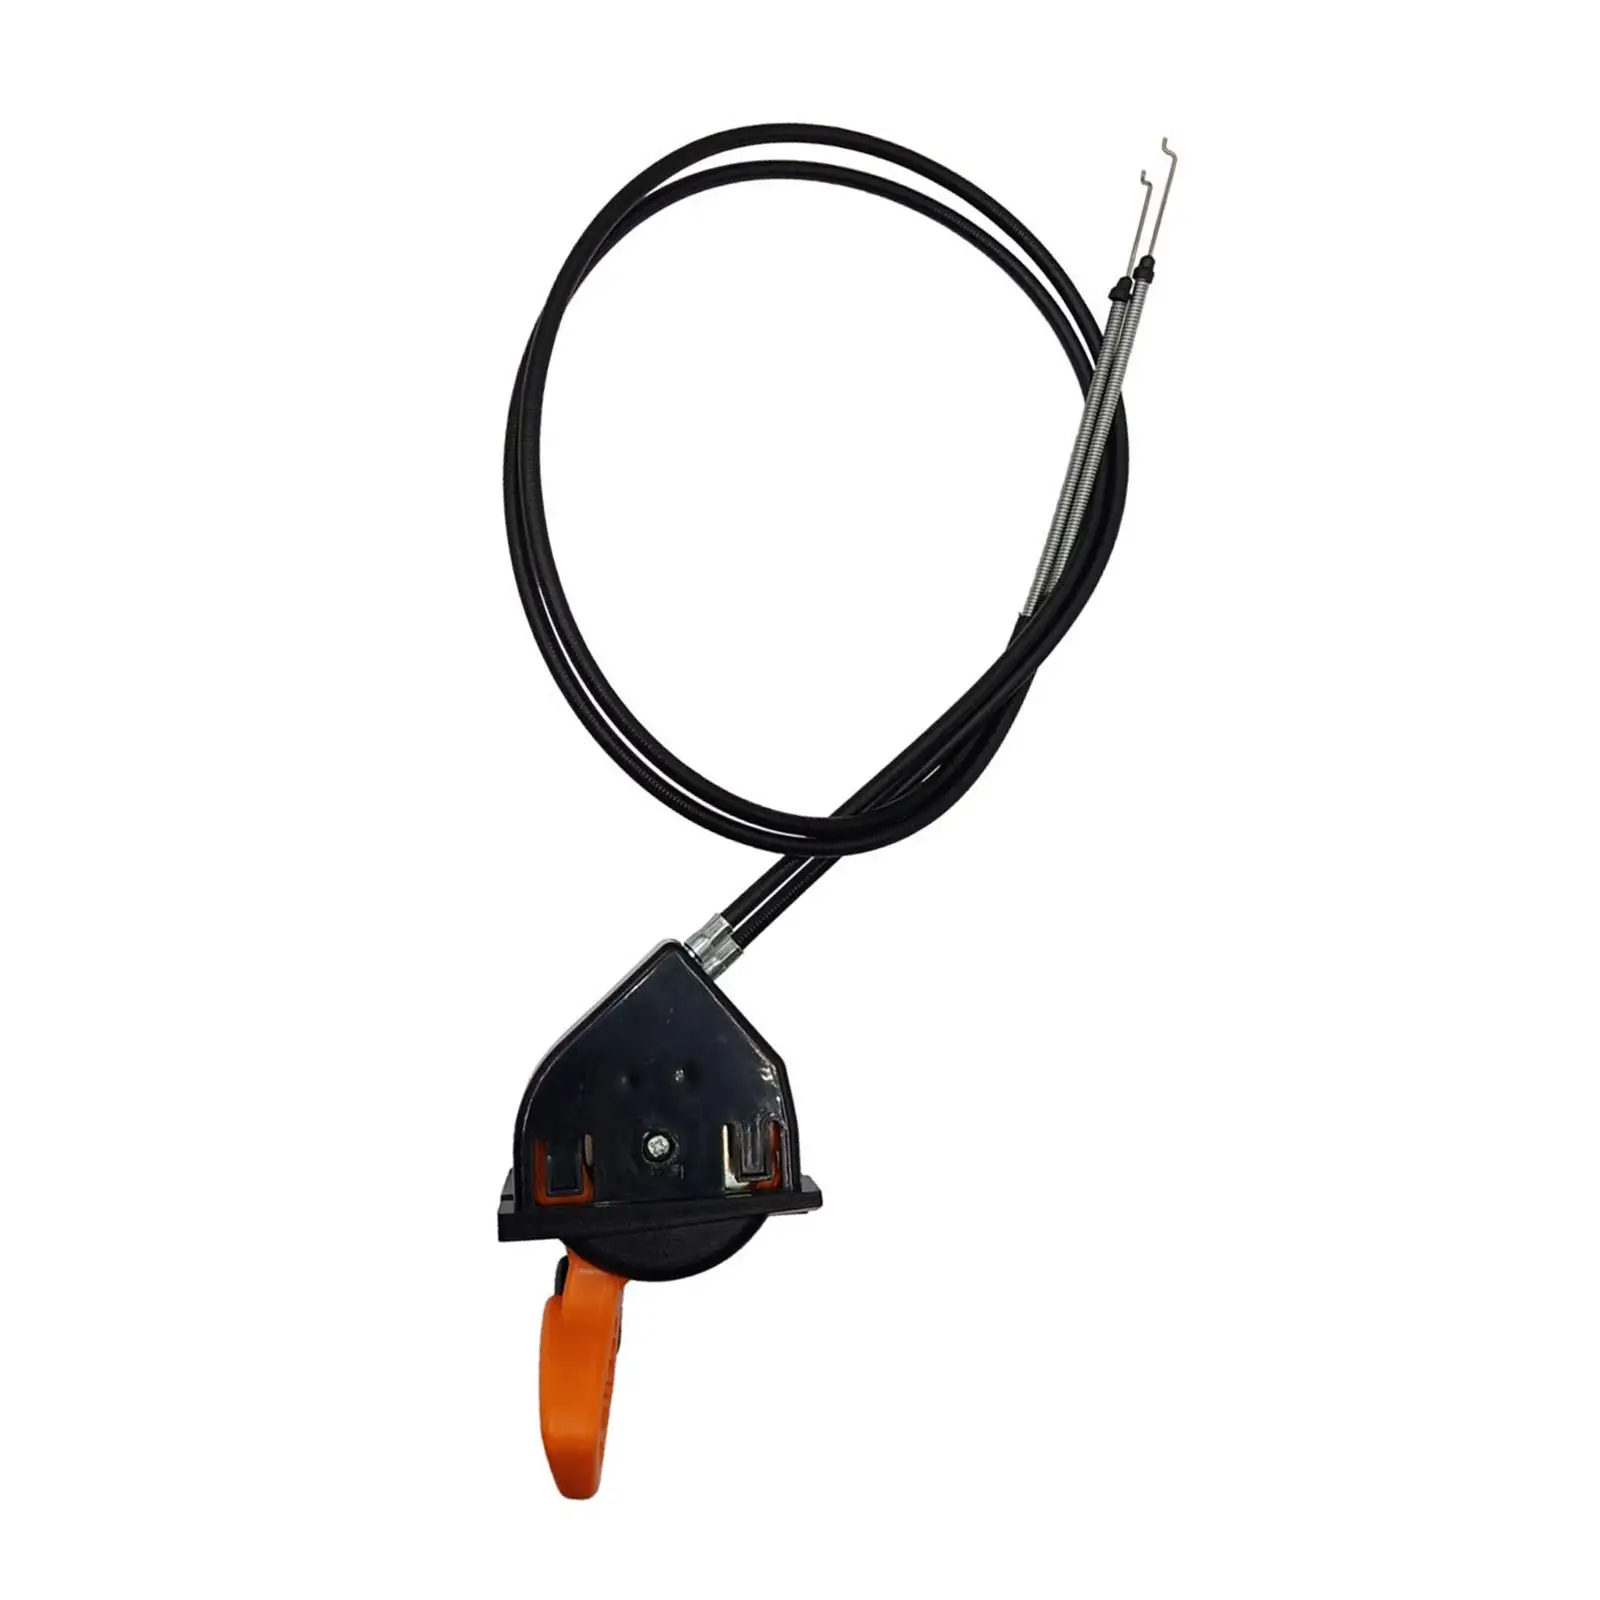 AM140333 Replace Equipment Accelerator Throttle Choke Lever Cable for JD Model X304 X310 X340 X360 X380 X534 X570 X580